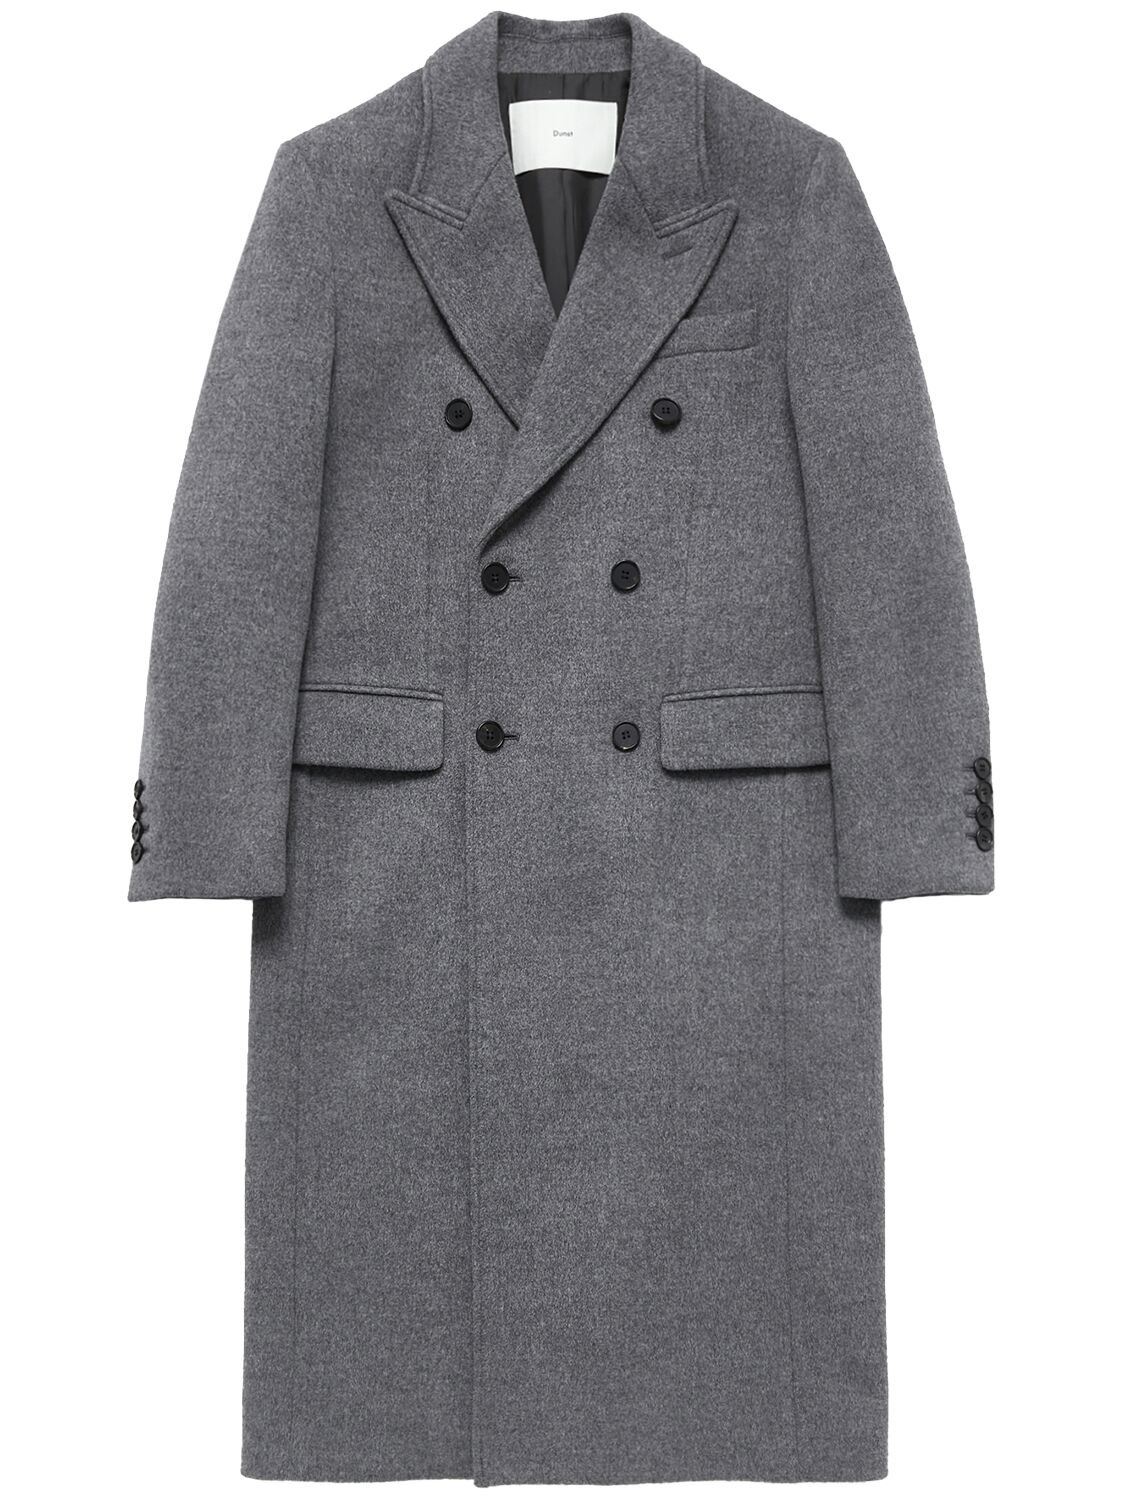 Dunst Unisex Tailored Wool Blend Coat In Gray